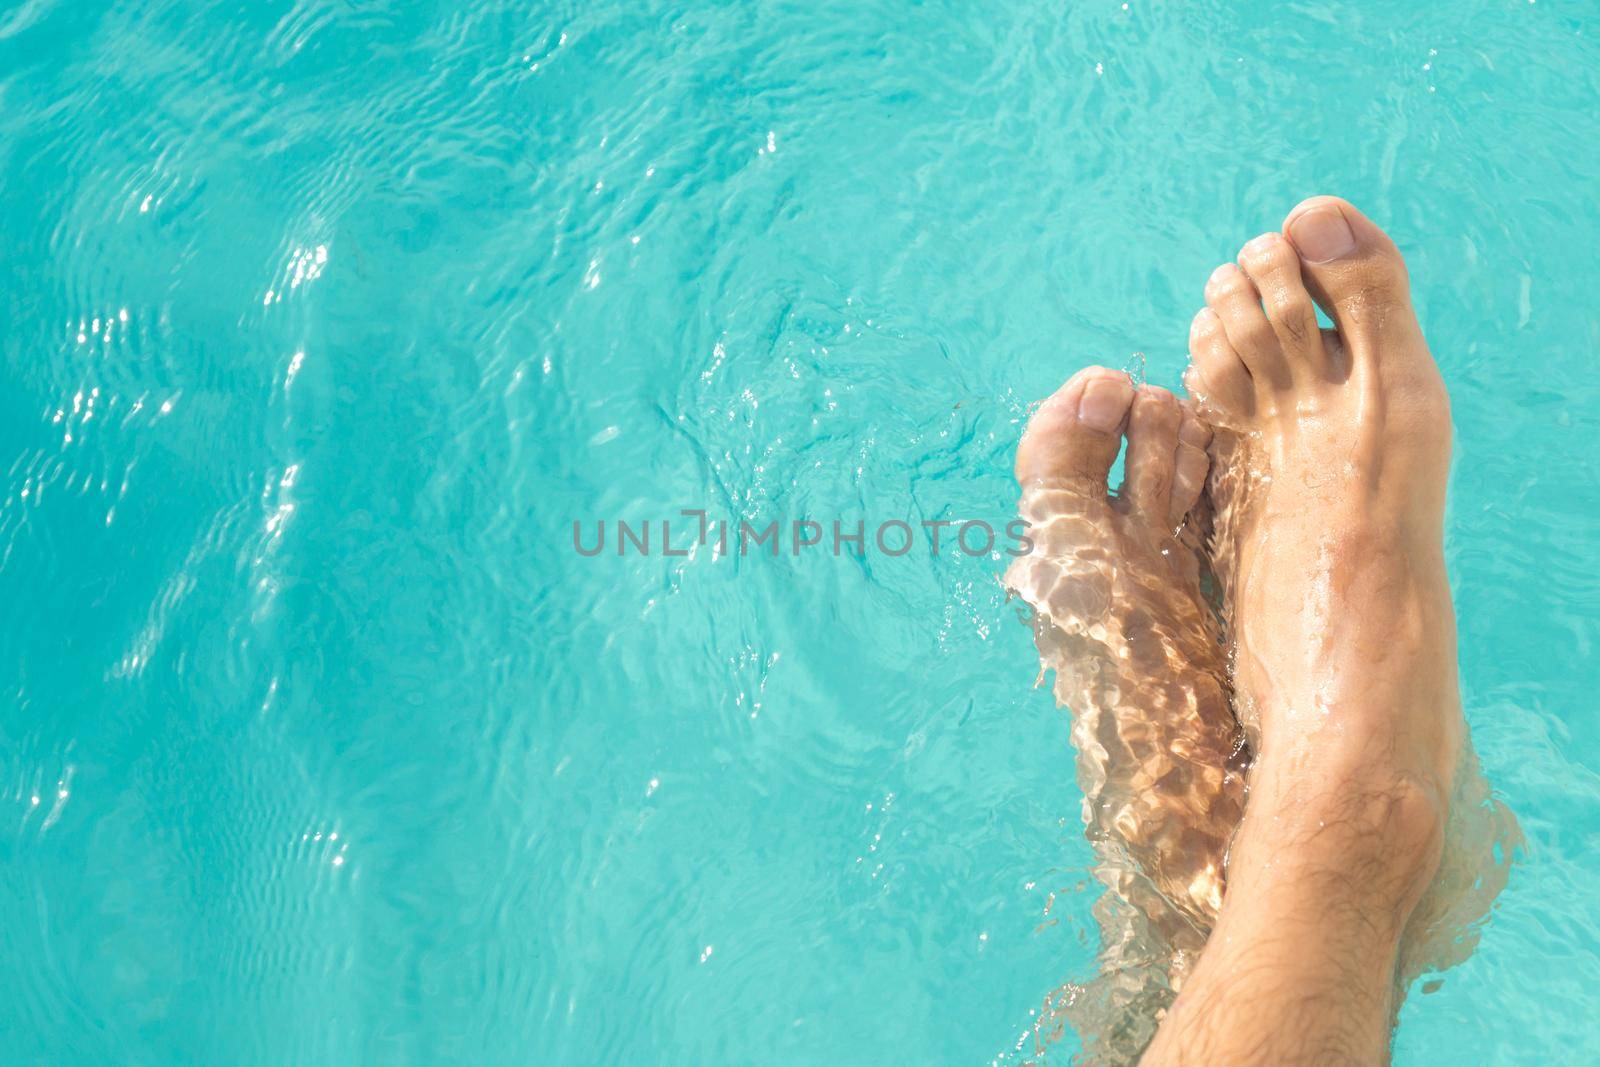 pretty man's feet in the turquoise blue pool water horizontal background